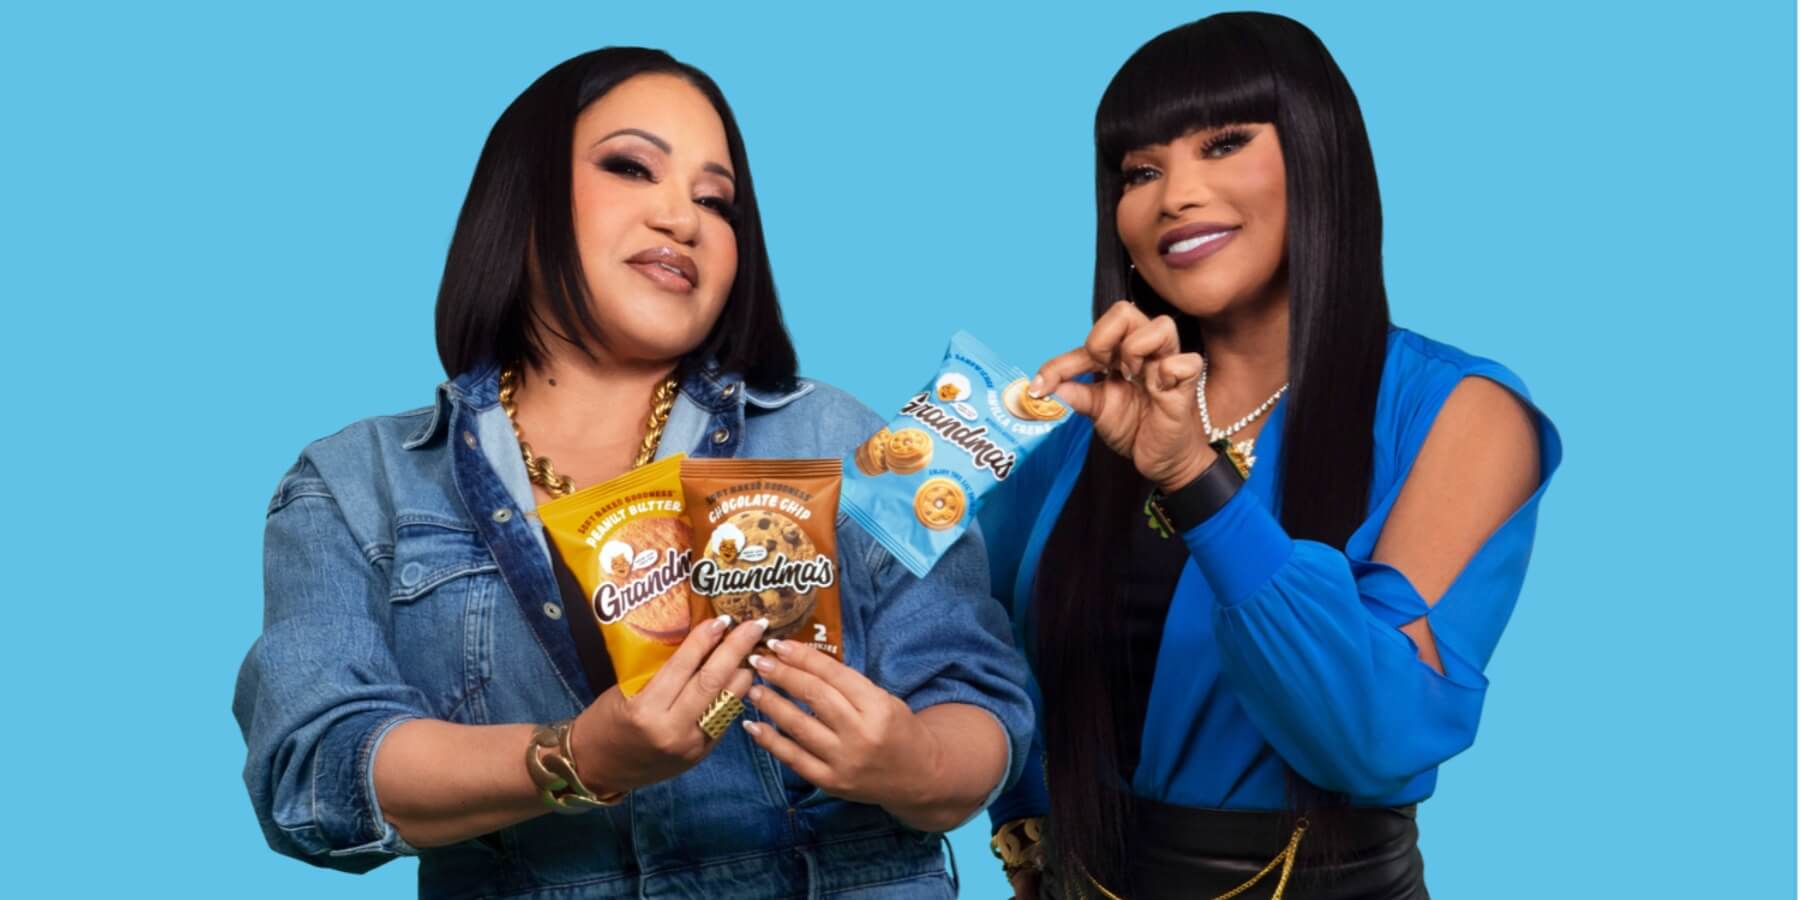 Rap legends Salt-N-Pepa have partnered with Grandma's Cookies for an iconic collaboration.